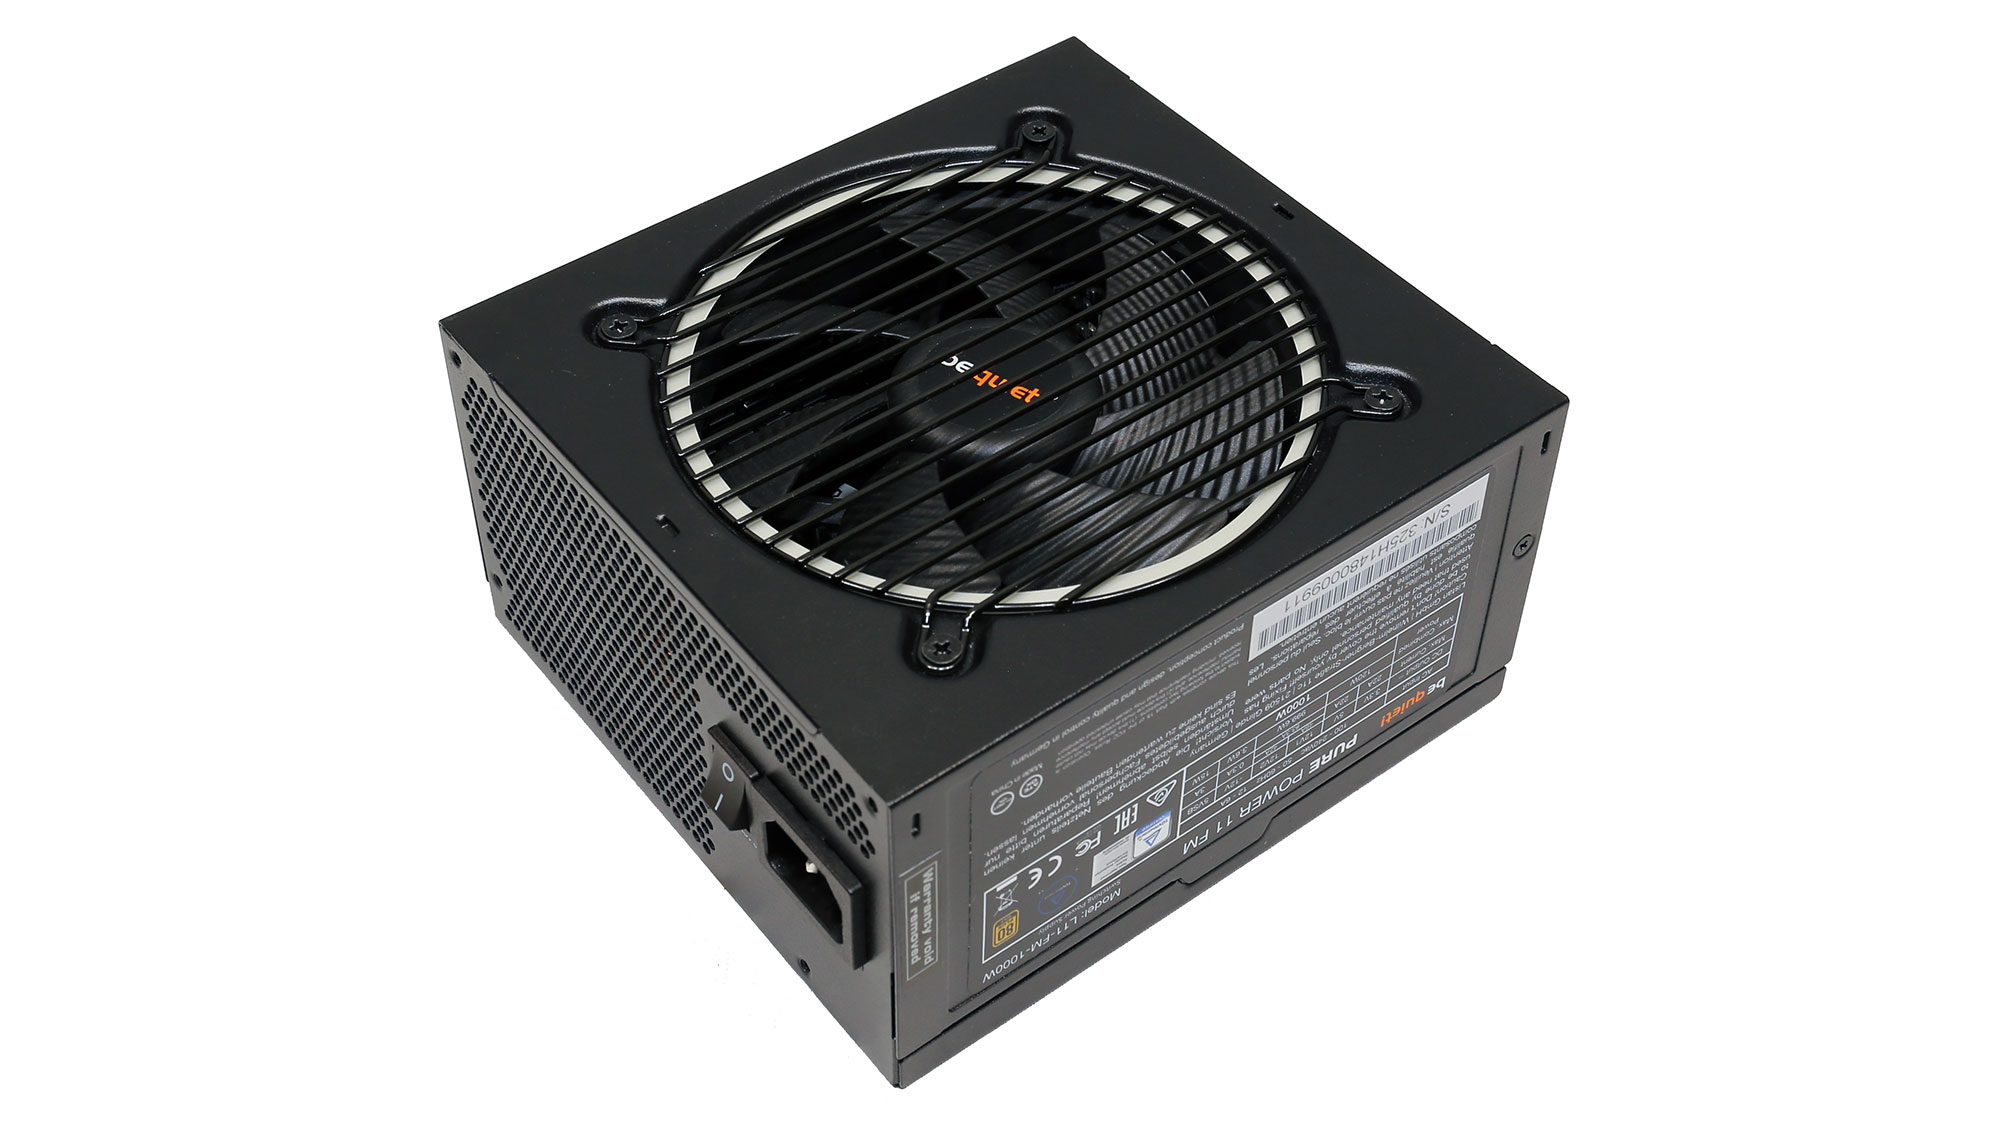 PURE POWER 11 FM  1000W silent essential Power supplies from be